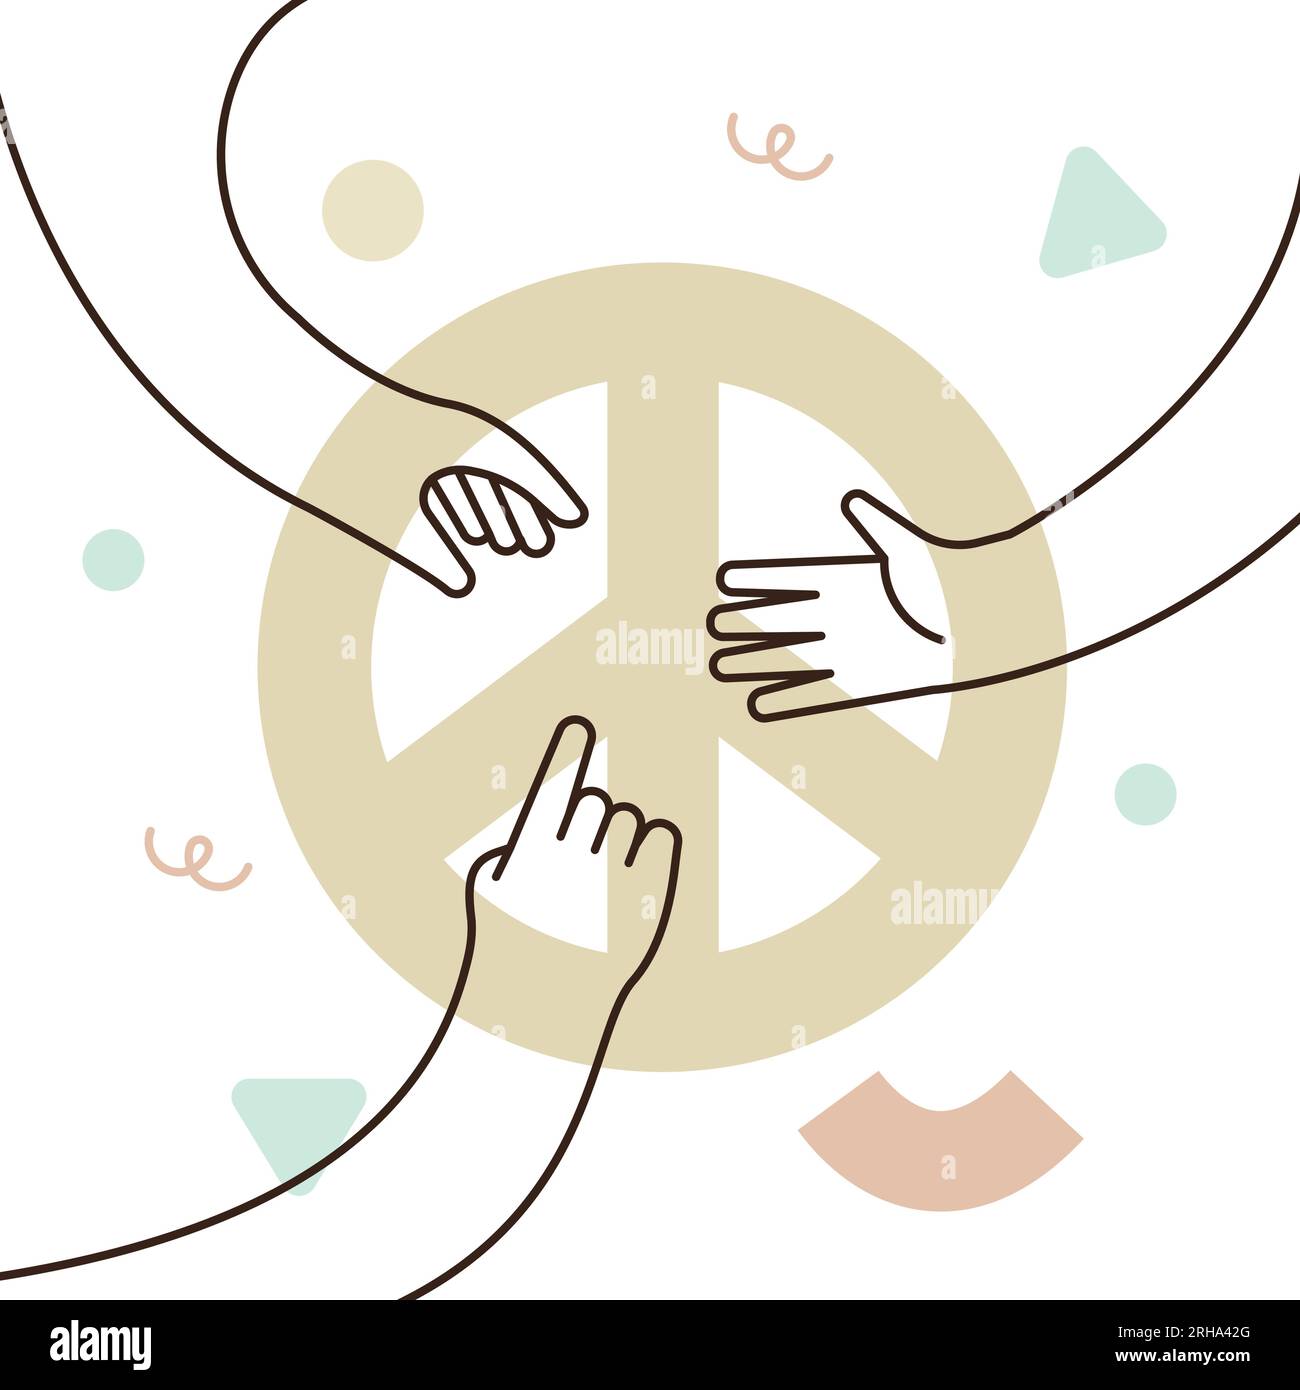 Group of people hands create together the peace symbol vector illustration. Concept of social help, cooperation, collaboration, non-violence, no war. Stock Vector